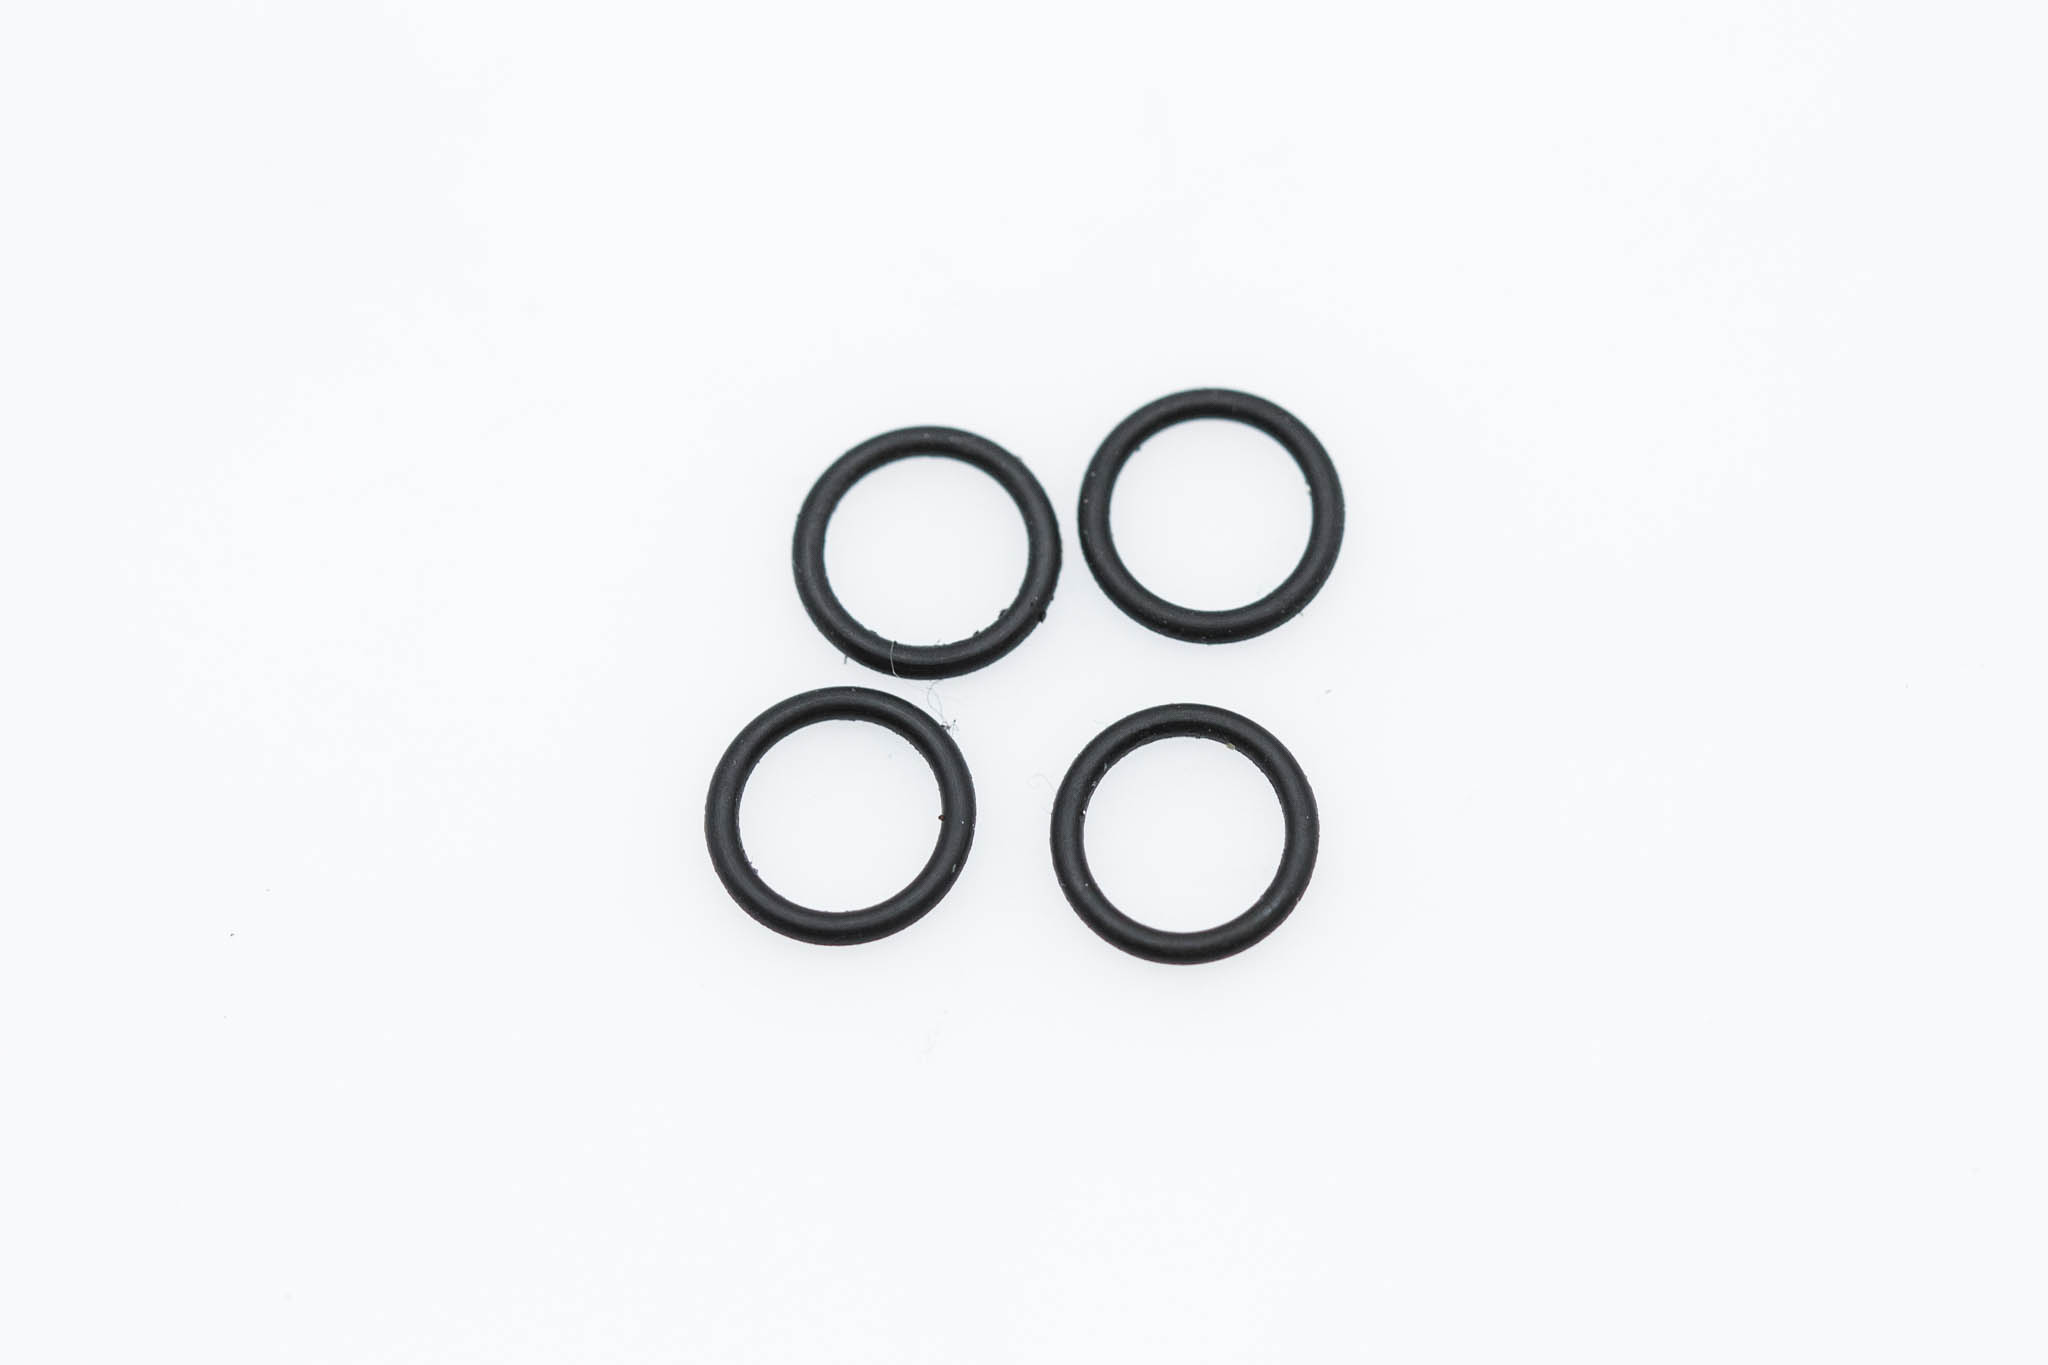 OEM O-Ring: Insertion Tube Proximal End Fitting (Thinner, Furthest from Tube) - BF-H190, BF-1TH190, BF-P190, BF-Q190, BF-XP190